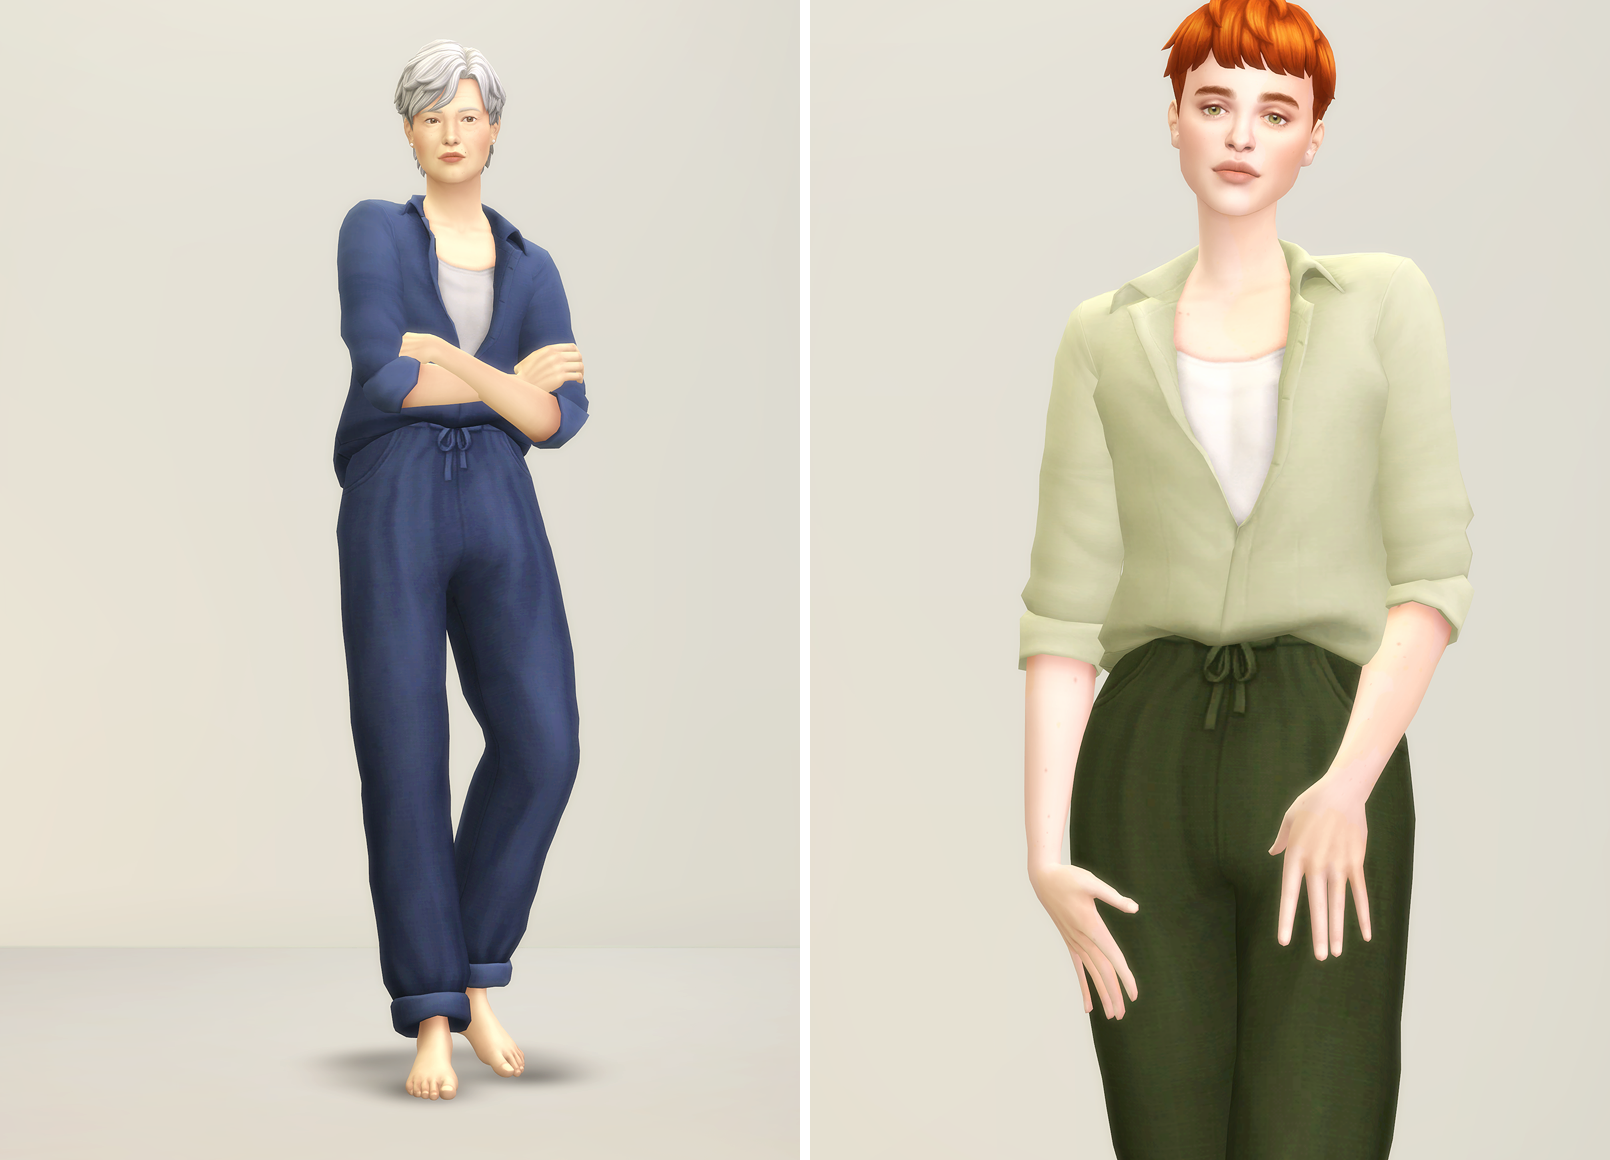 Mellow I - Rolled-Up Sleeves Shirt & Long Pants for F - The Sims 4 ...